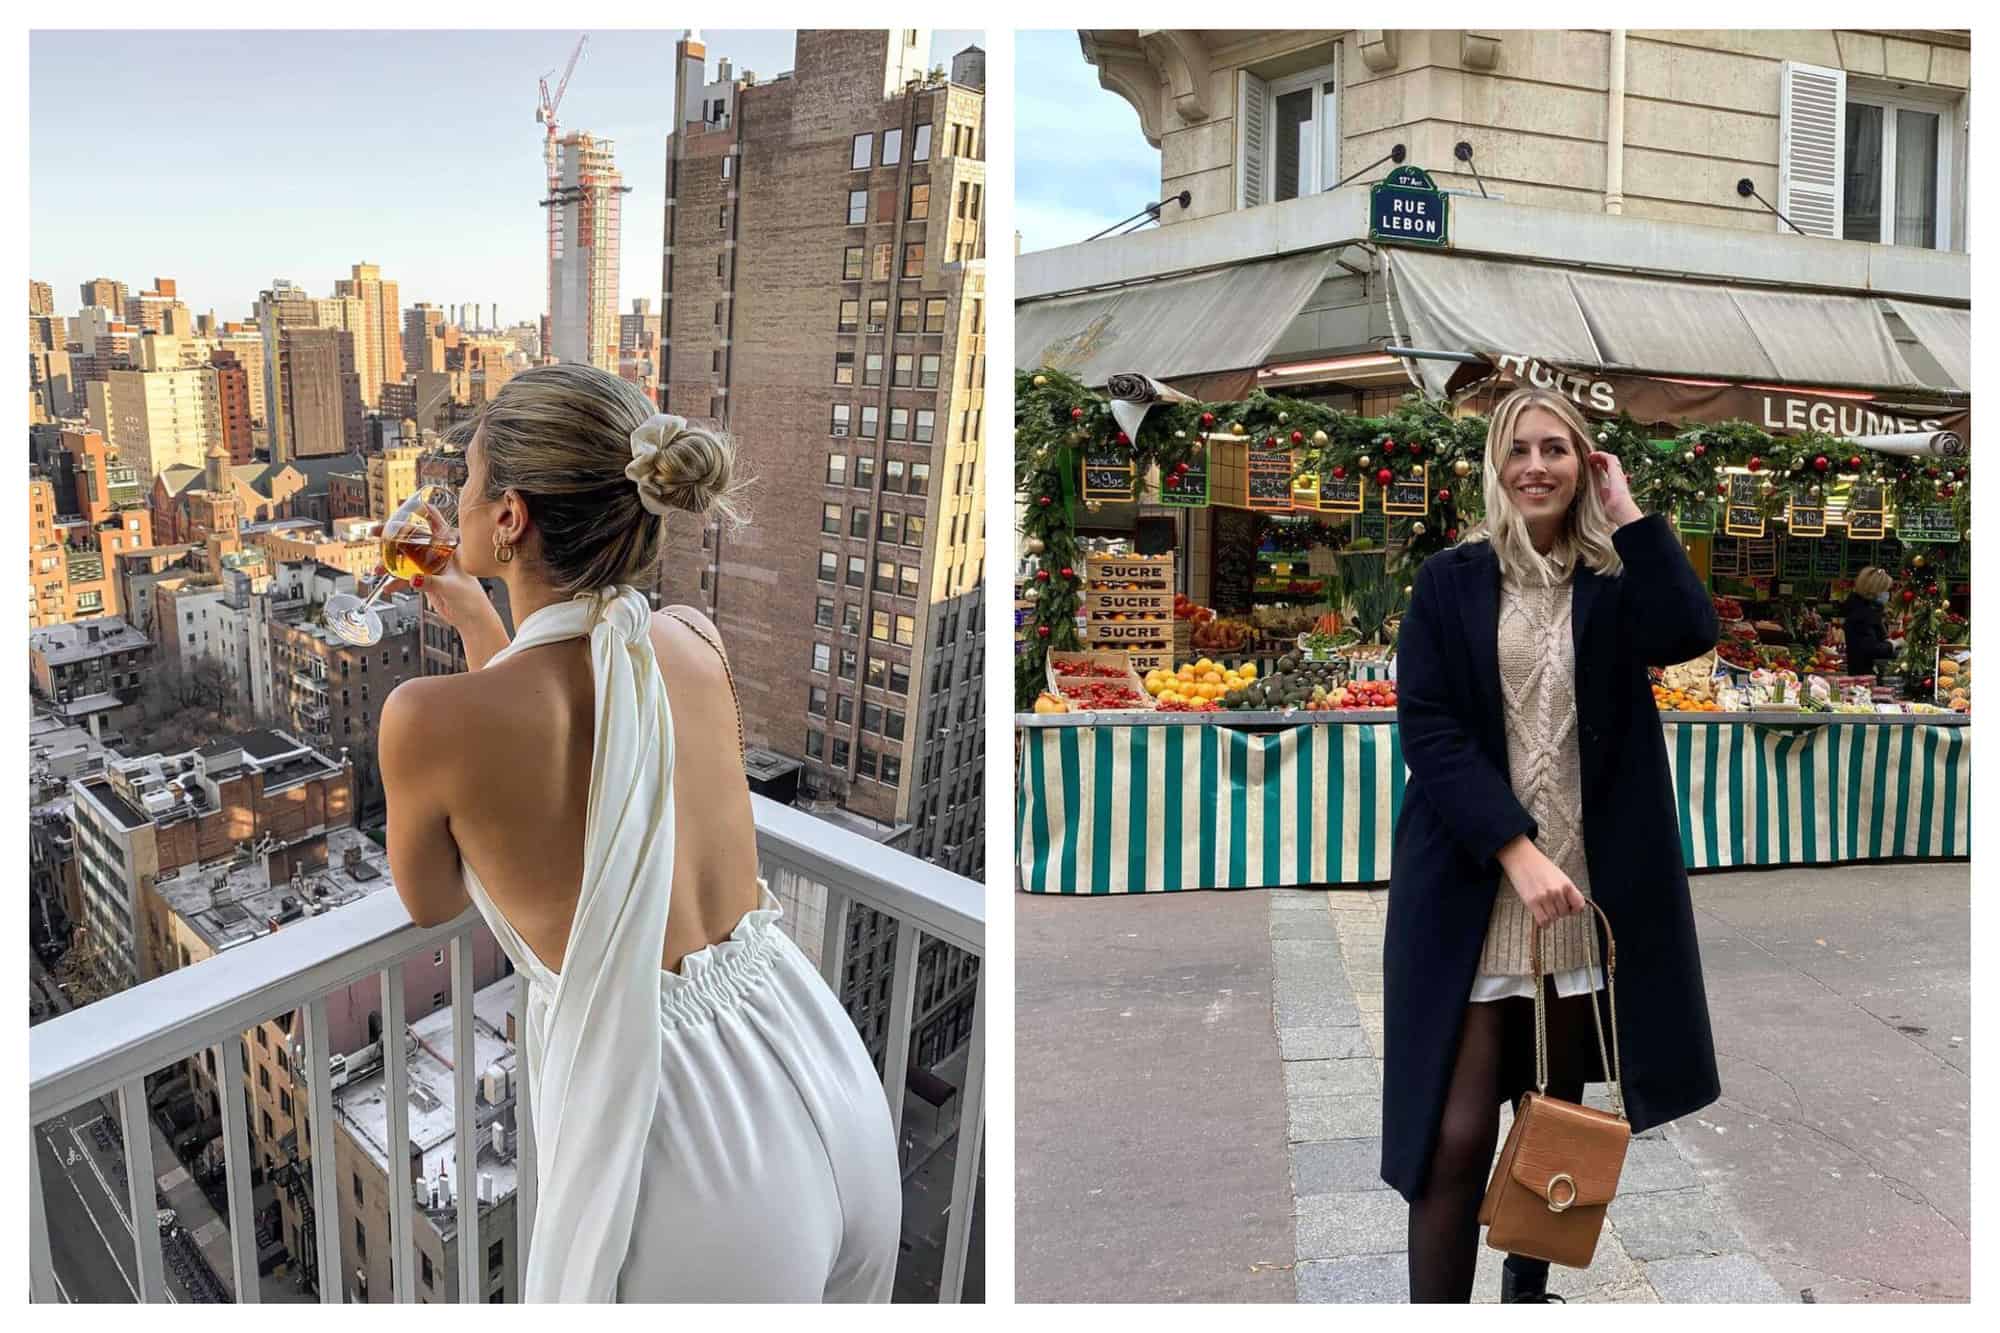 Left: Fashion influencer Gergana Ivanova is drinking a glass of rosé while leaning in a balcony, looking at the New York City skyline. She is wearing a satin silk white halter jumpsuit with a long ribbon tied in her neck and her back is exposed. Right: Fashion blogger Juliette is in Montmartre in the 18th arrondissement of Paris, in rue Lebon. She is standing in front of a marché that sells fruits and vegetables. She is wearing a beige knitted dress and a black coat. She is also wearing sheer black tights to cover her legs since her dress cuts to her thighs. 